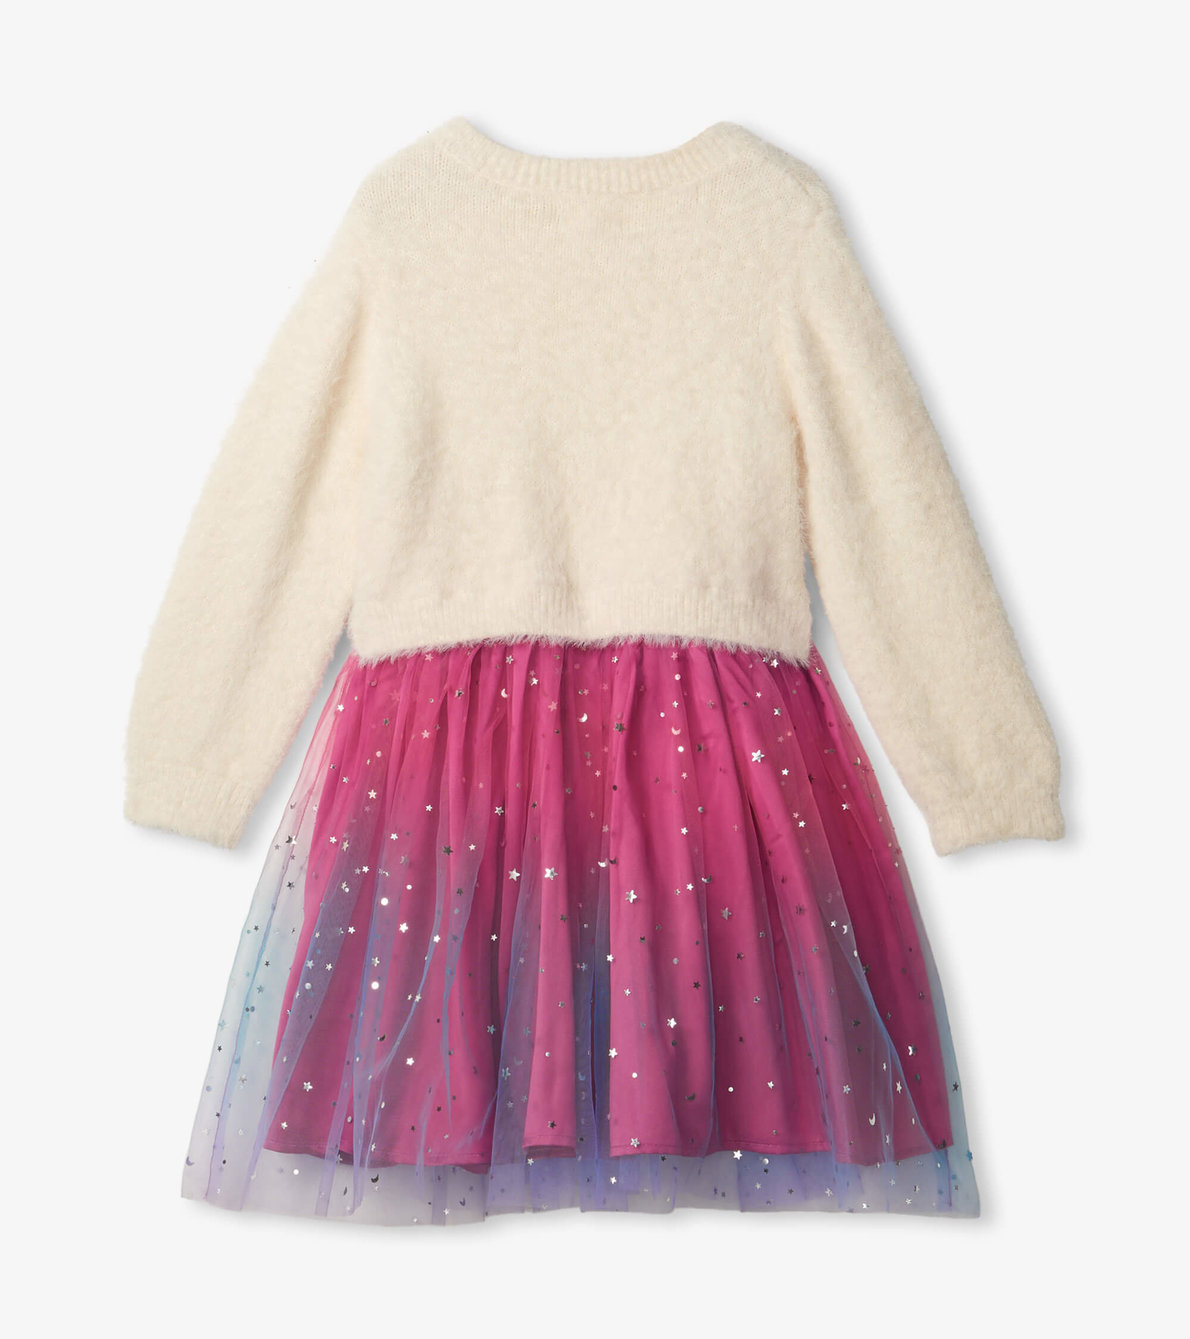 View larger image of Girls Falling Stars Sweater Tulle Dress